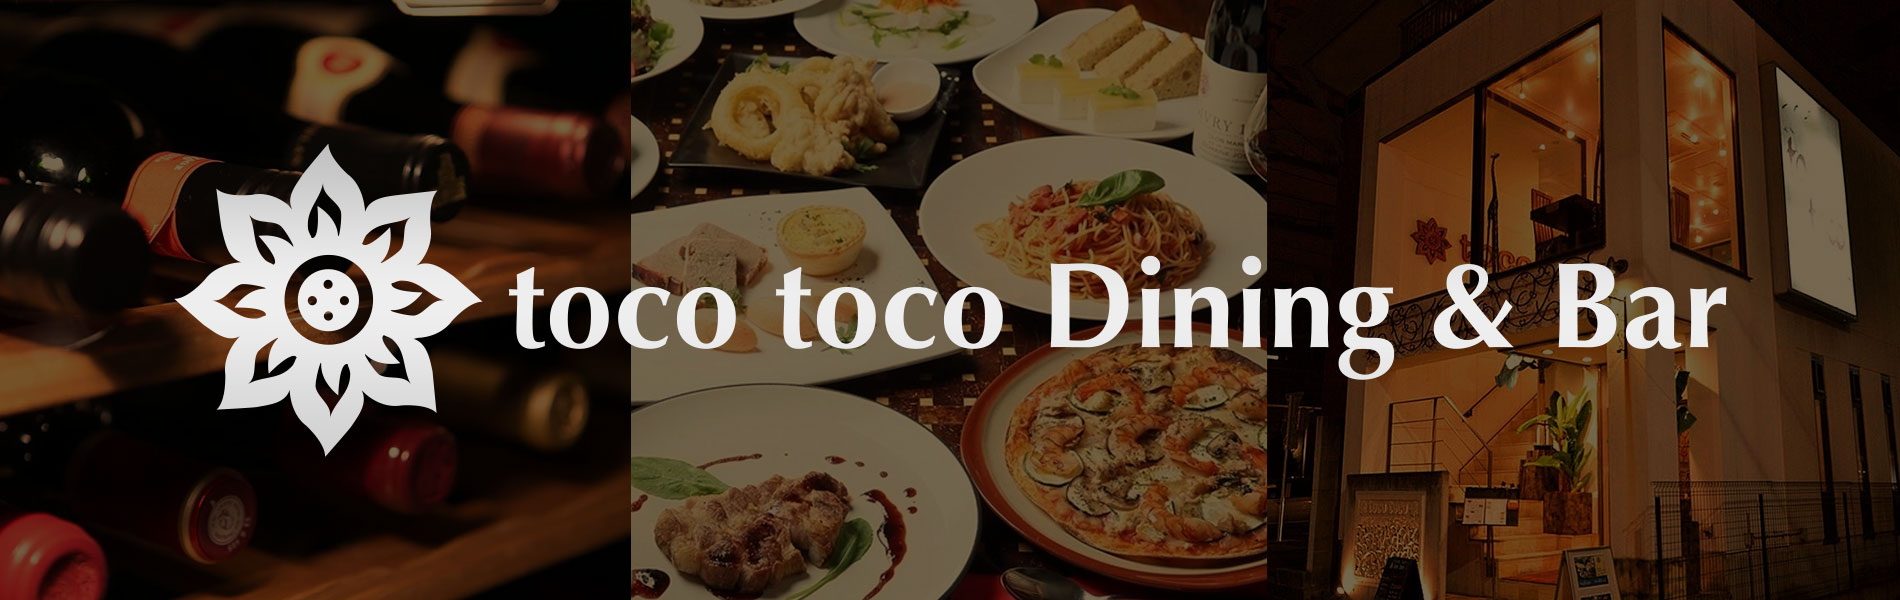 toco toco dining and bar